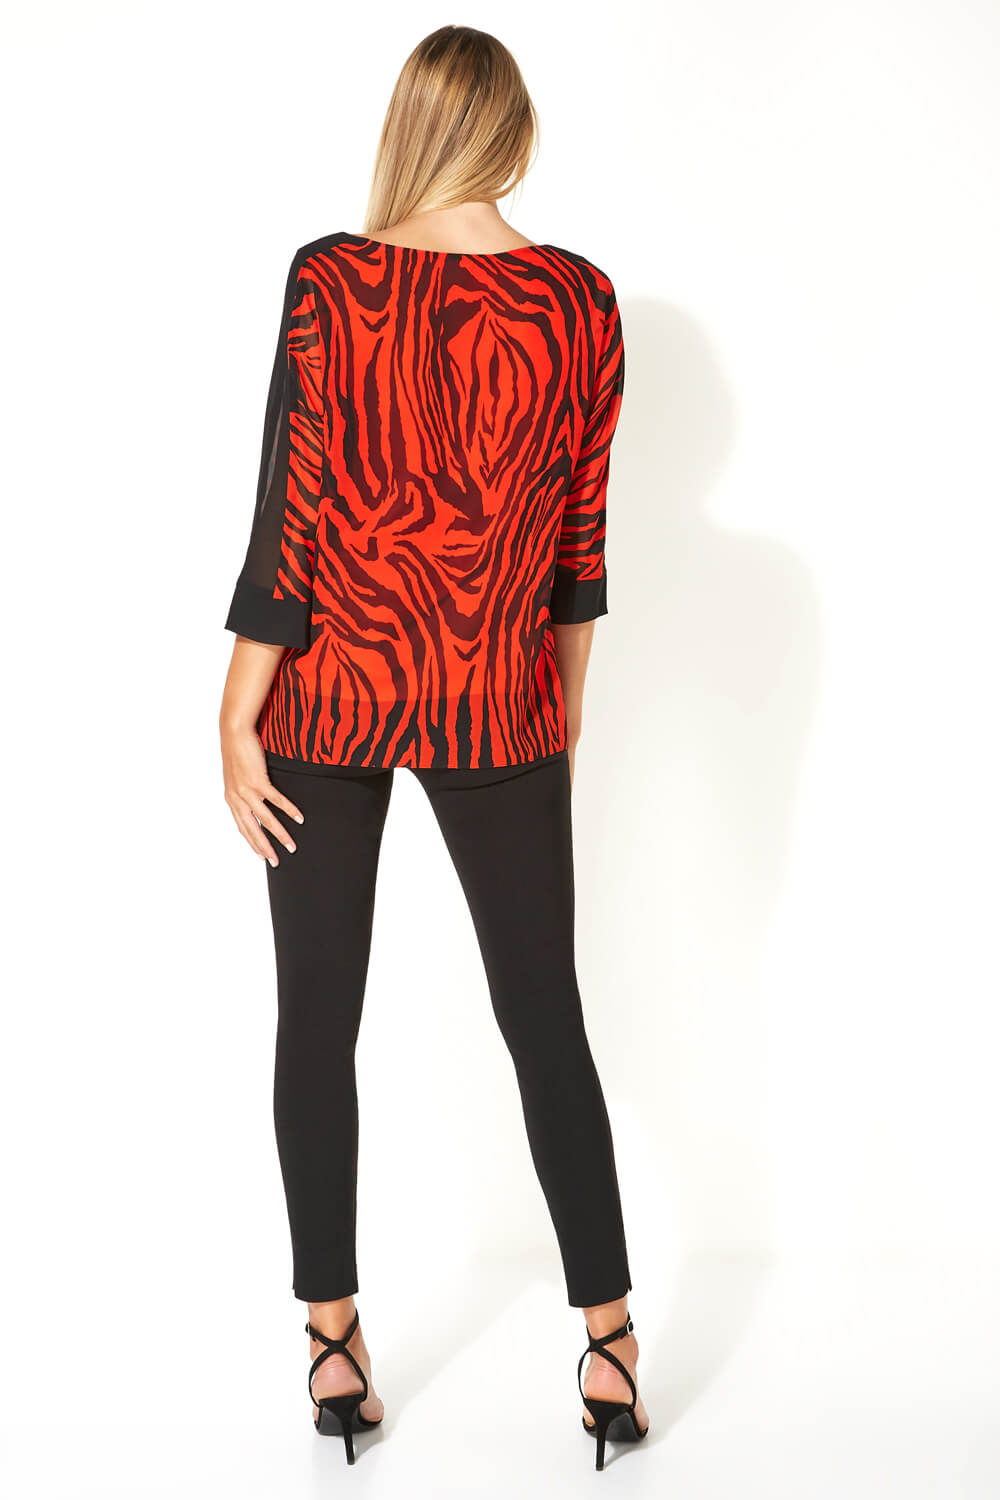 Red Animal Tiger Print 3/4 Sleeve Top, Image 3 of 5